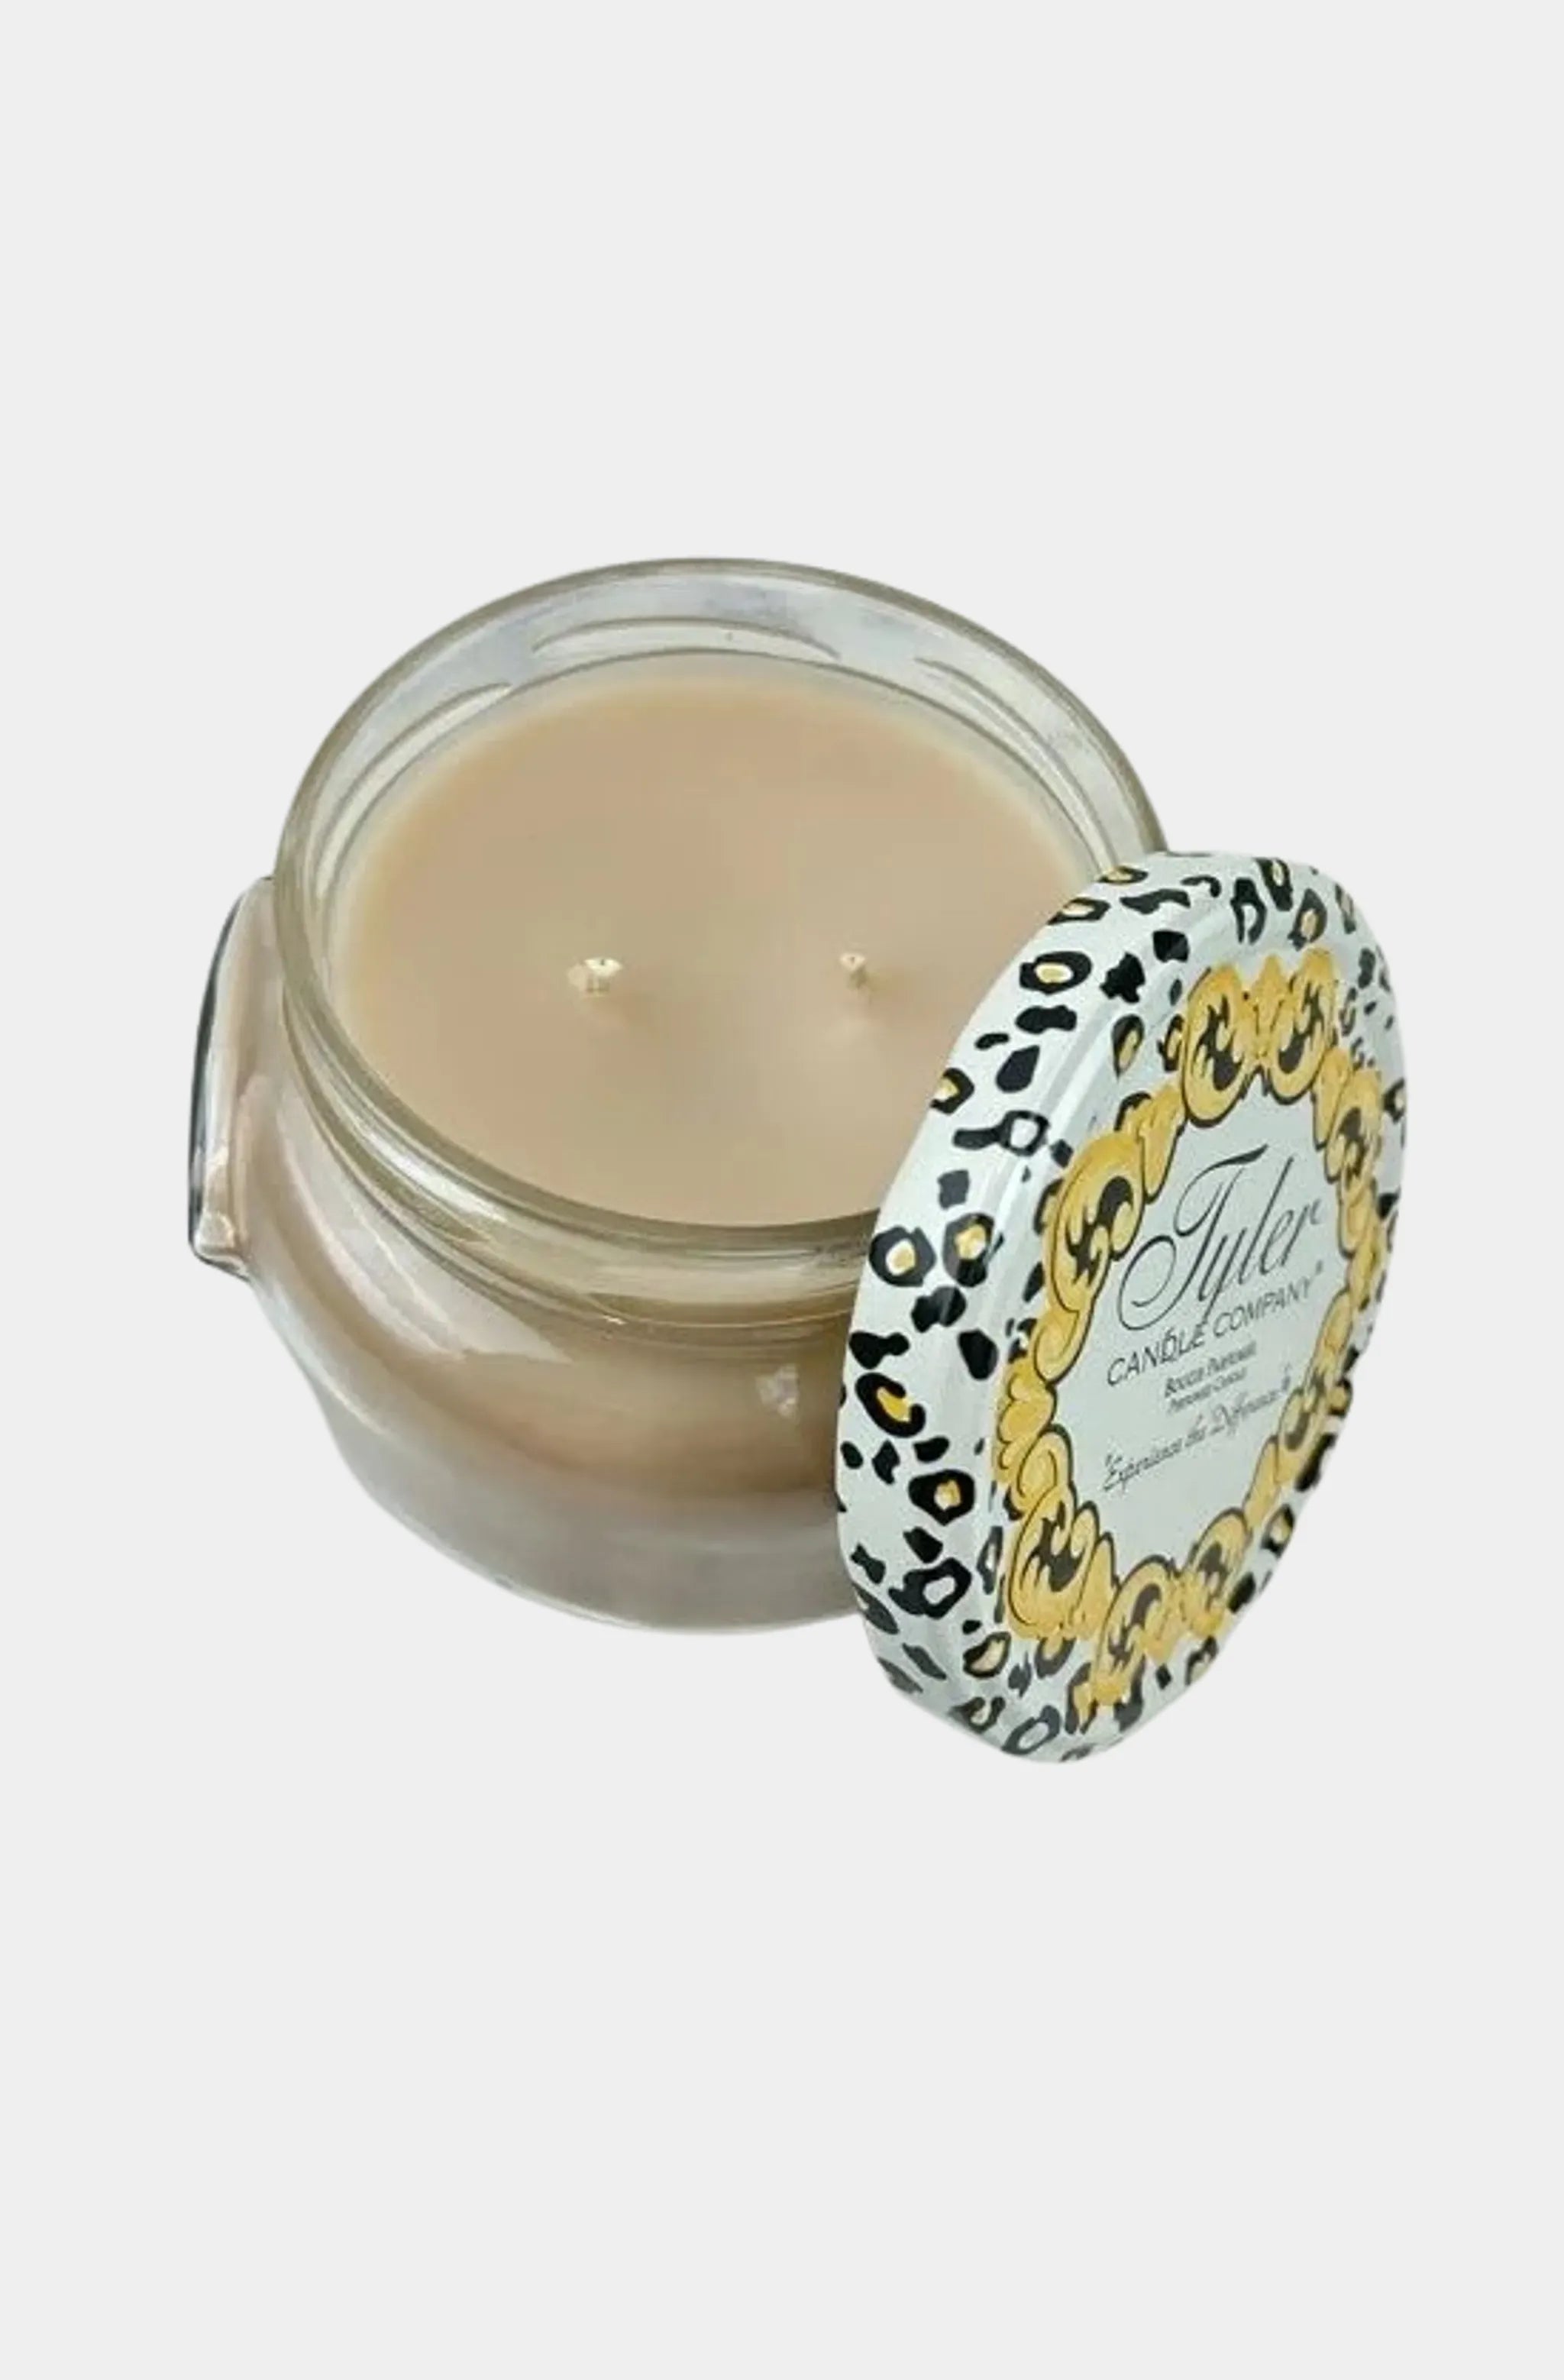 22 OZ 2-Wick Candle